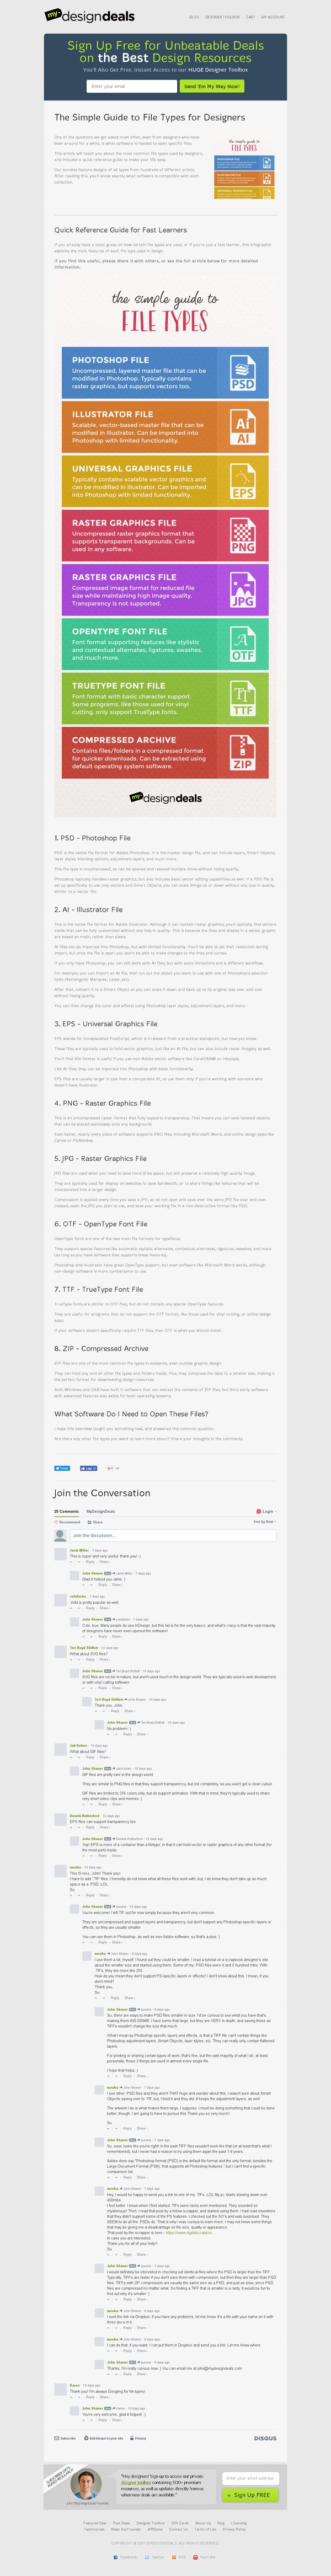 mydesigndeals.com/blog/the-simple-guide-to-file-types-for-designers